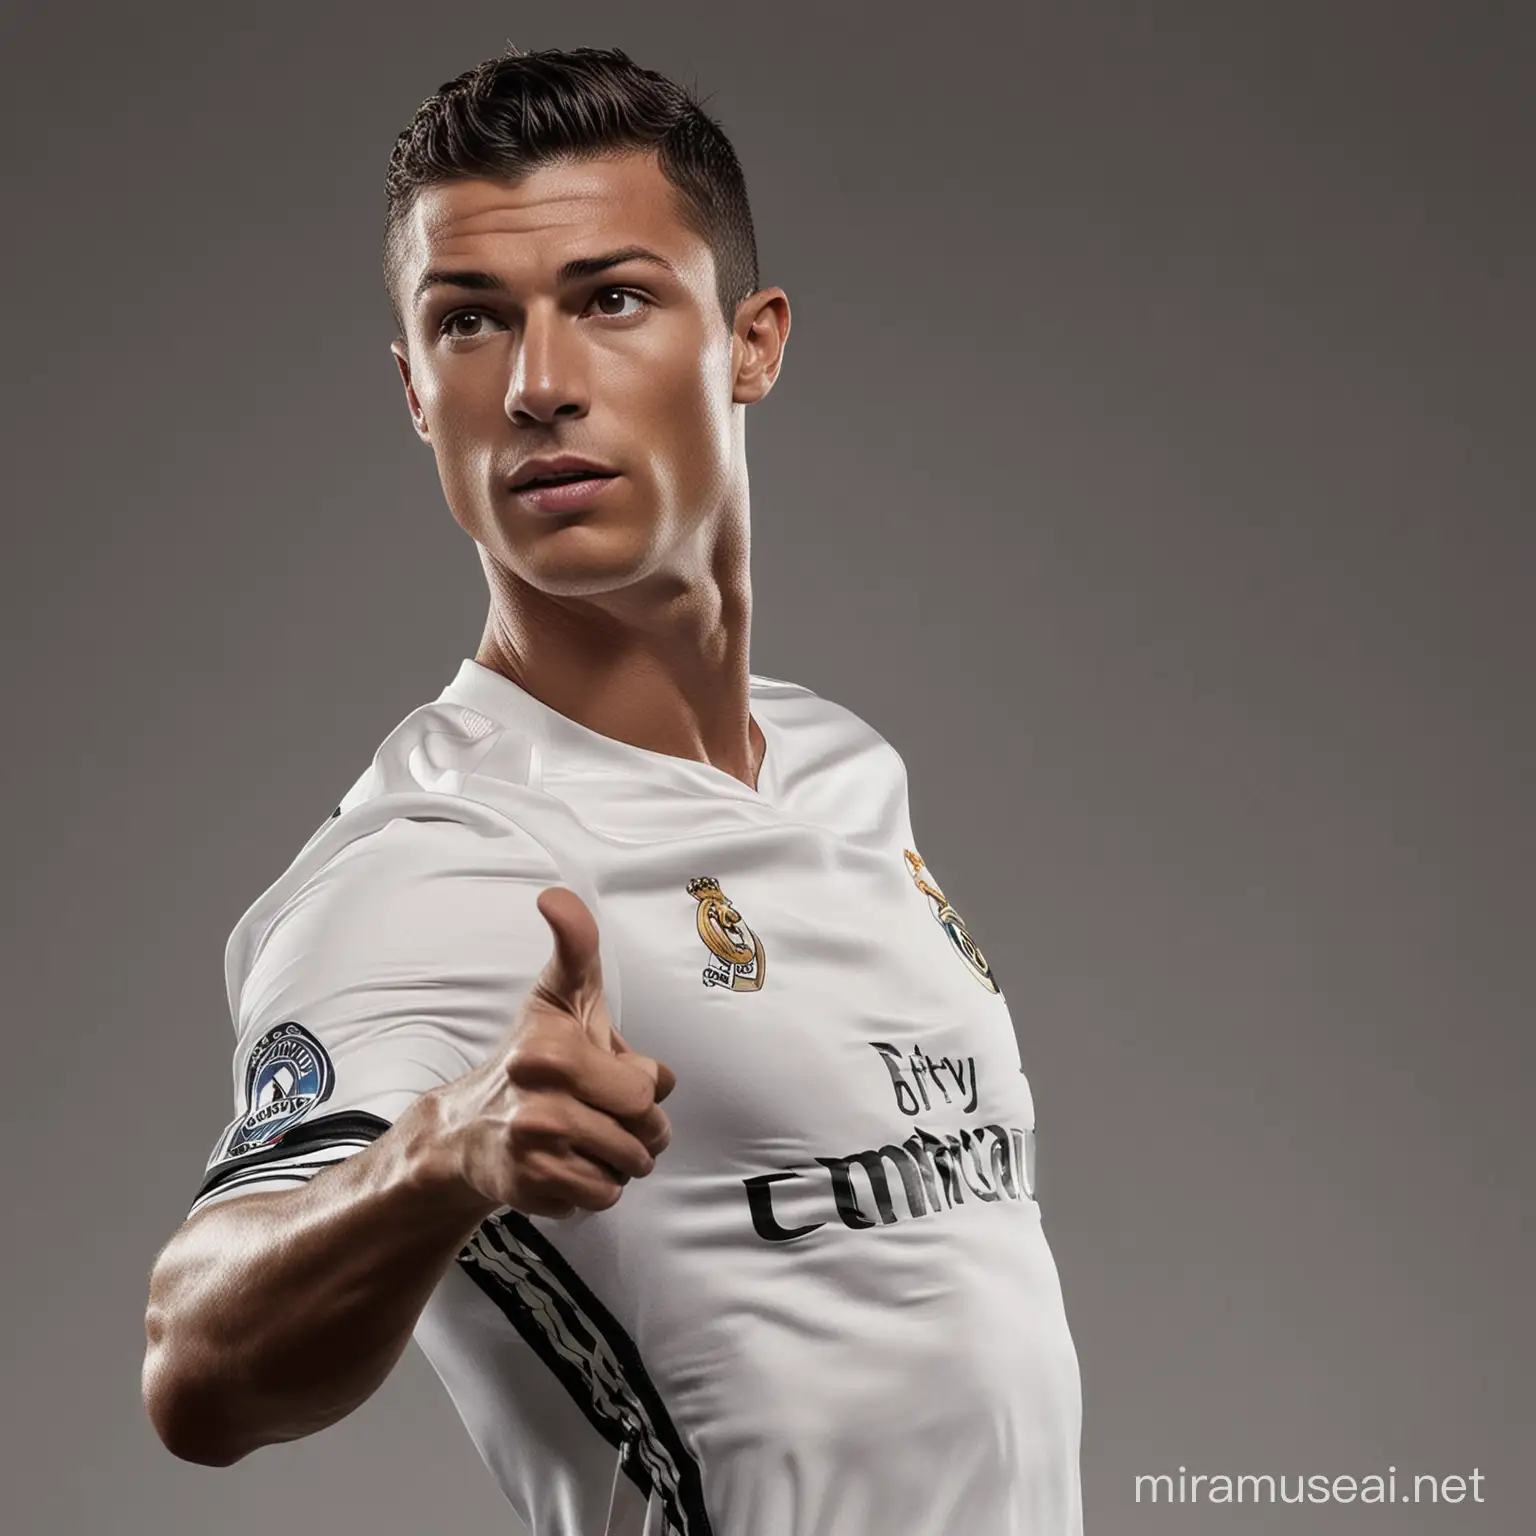 Channeling Cristiano Ronaldo Captivating and Confident Pose